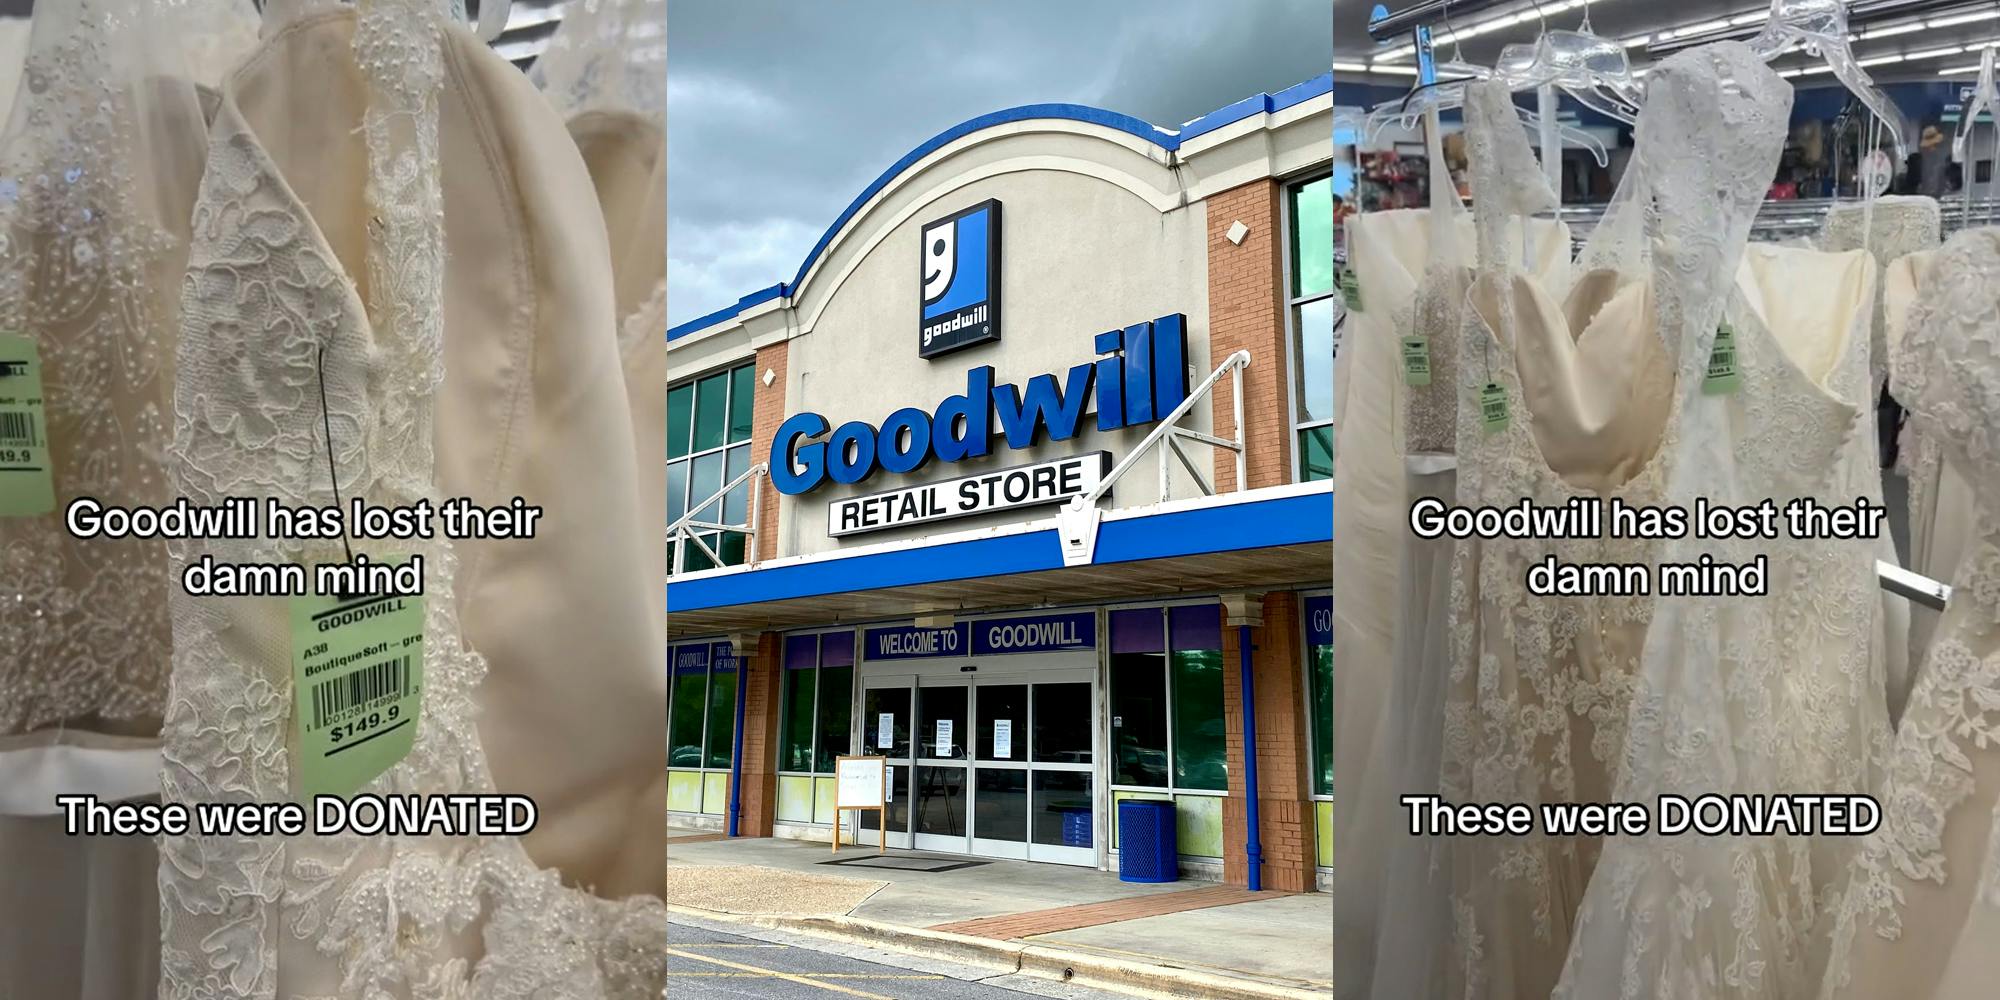 Goodwill wedding dresses on rack with caption "Goodwill lost their damn mind these were DONATED" (l) Goodwill building with sign (c) Goodwill wedding dresses on rack with caption "Goodwill lost their damn mind these were DONATED" (r)